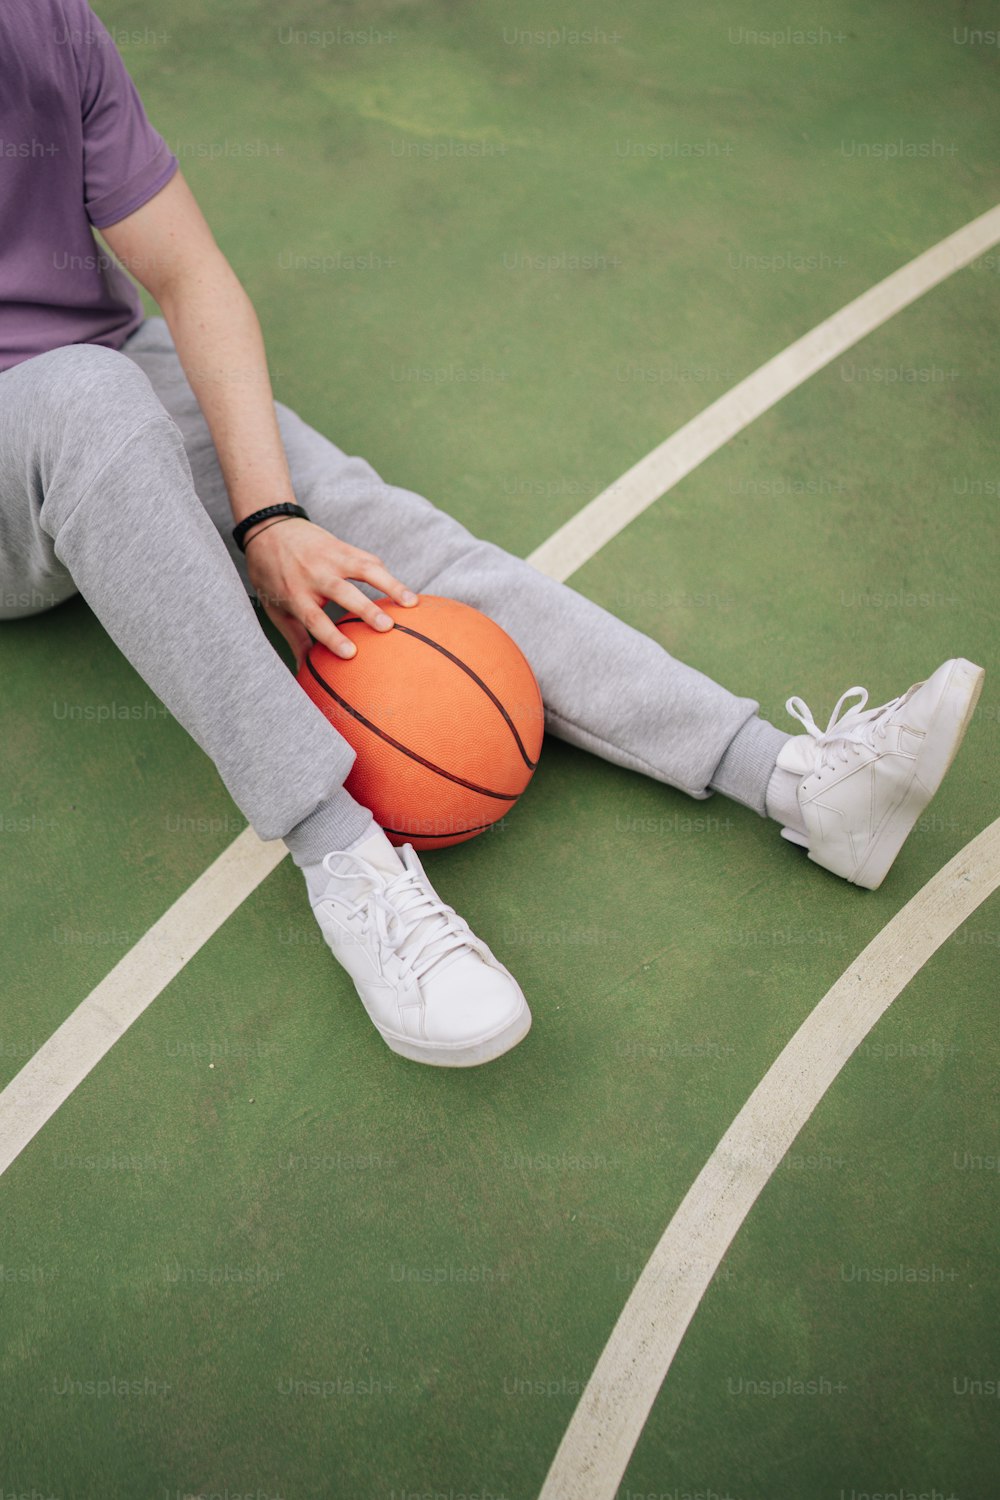 a person sitting on a court with a basketball